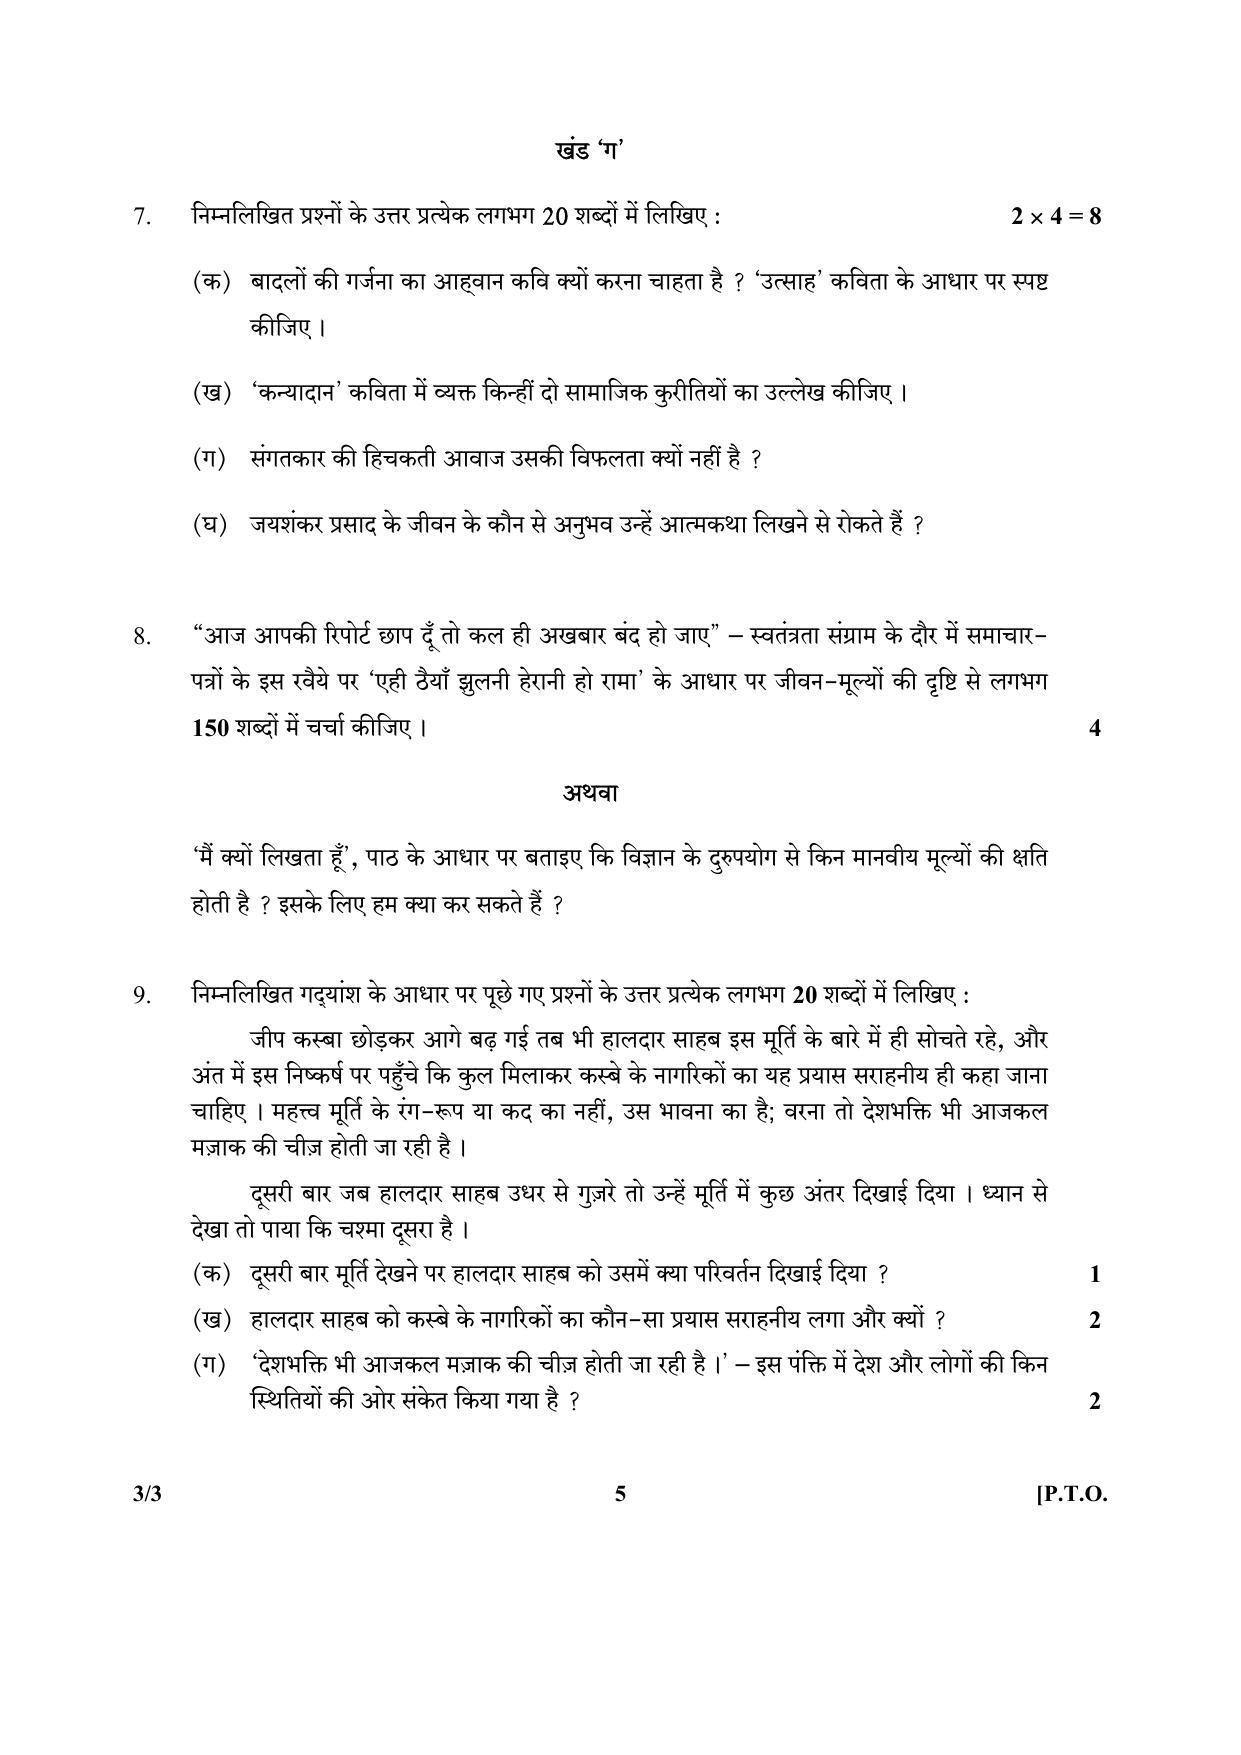 CBSE Class 10 3-3_Hindi SET-3 2018 Question Paper - Page 5